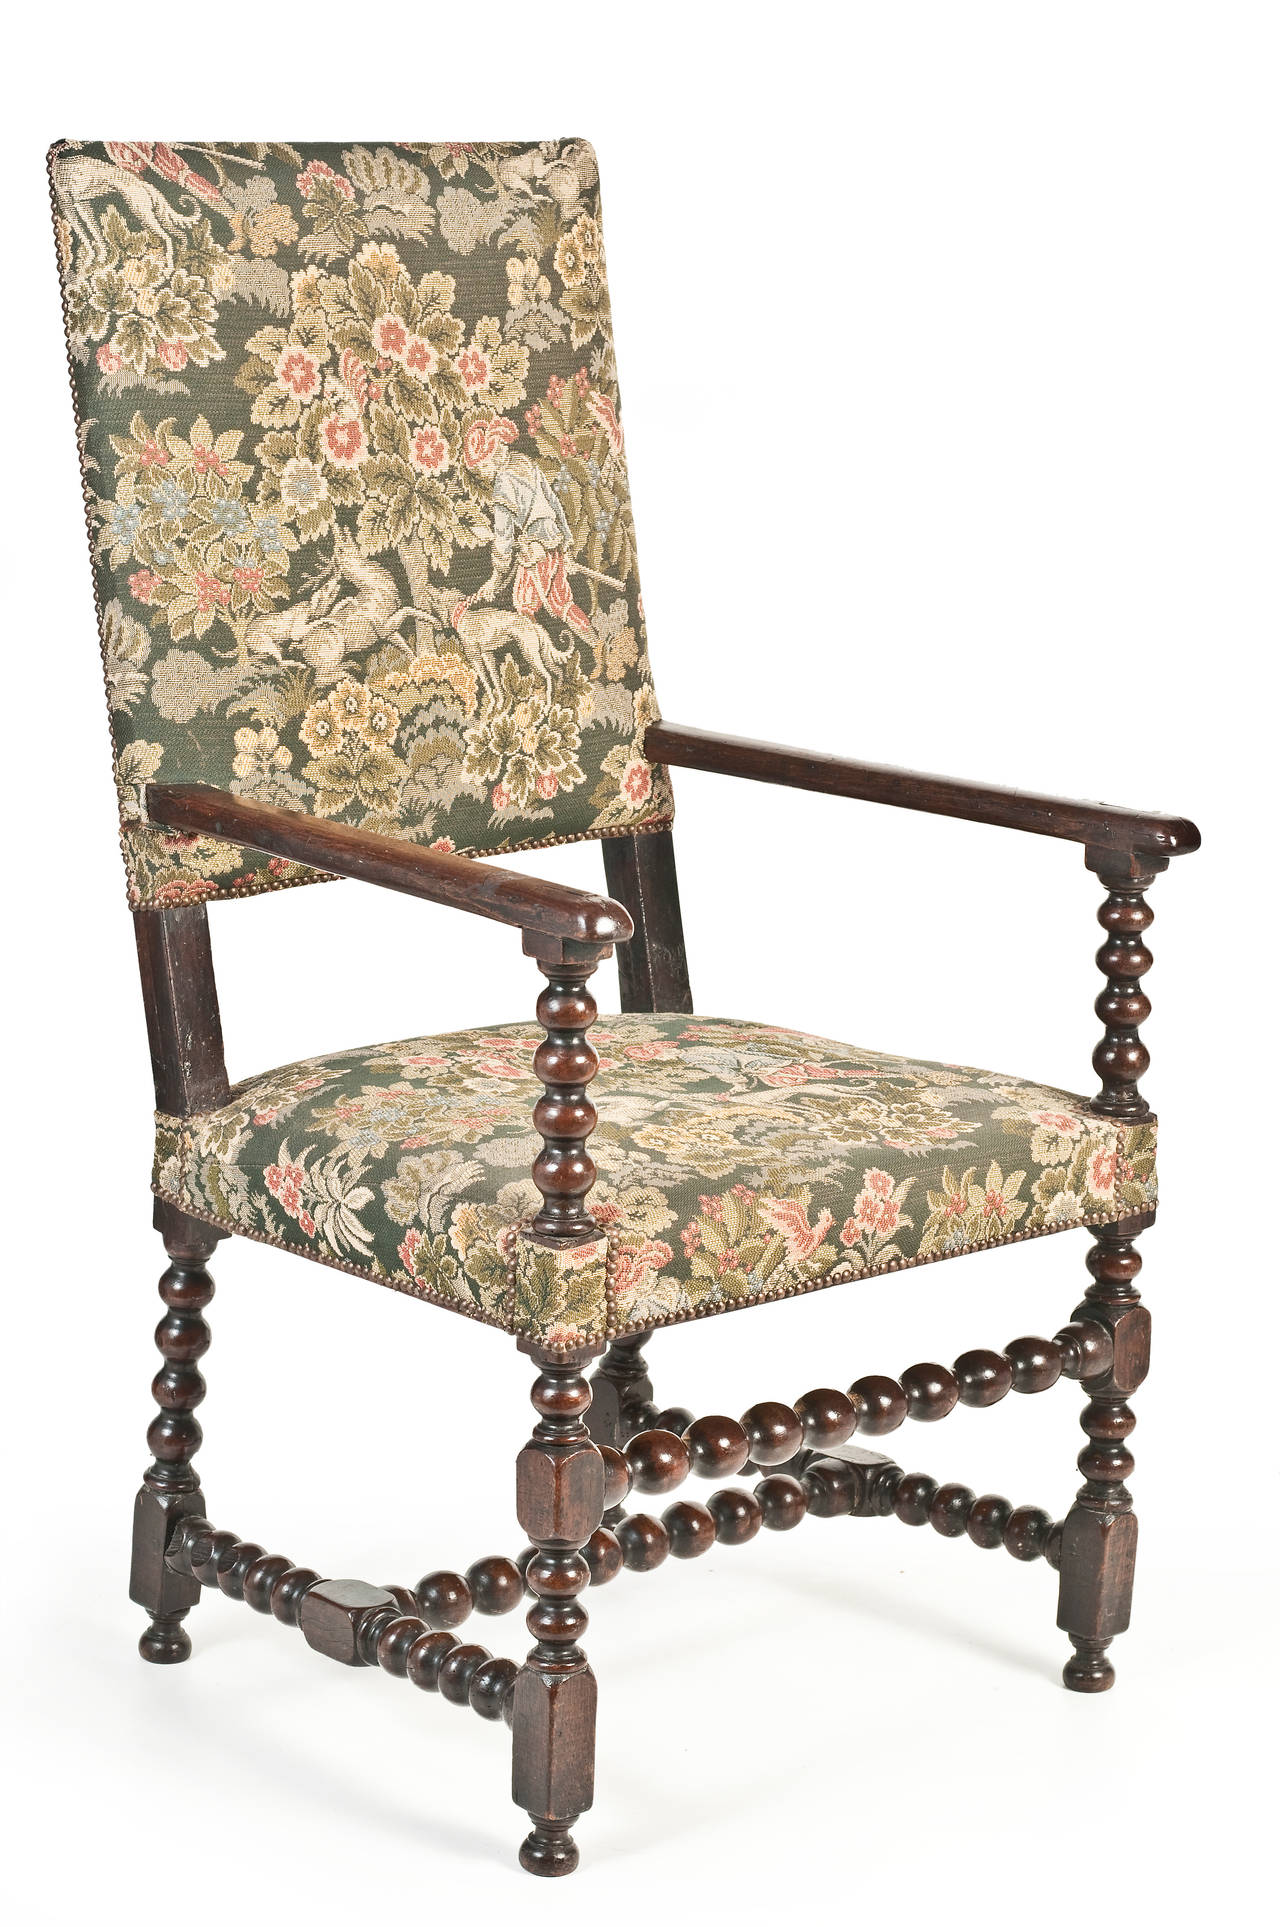 Early 19th Century French Oak Bobbin-Turned Tapestry Upholstered Armchair In Good Condition For Sale In Malvern, Victoria